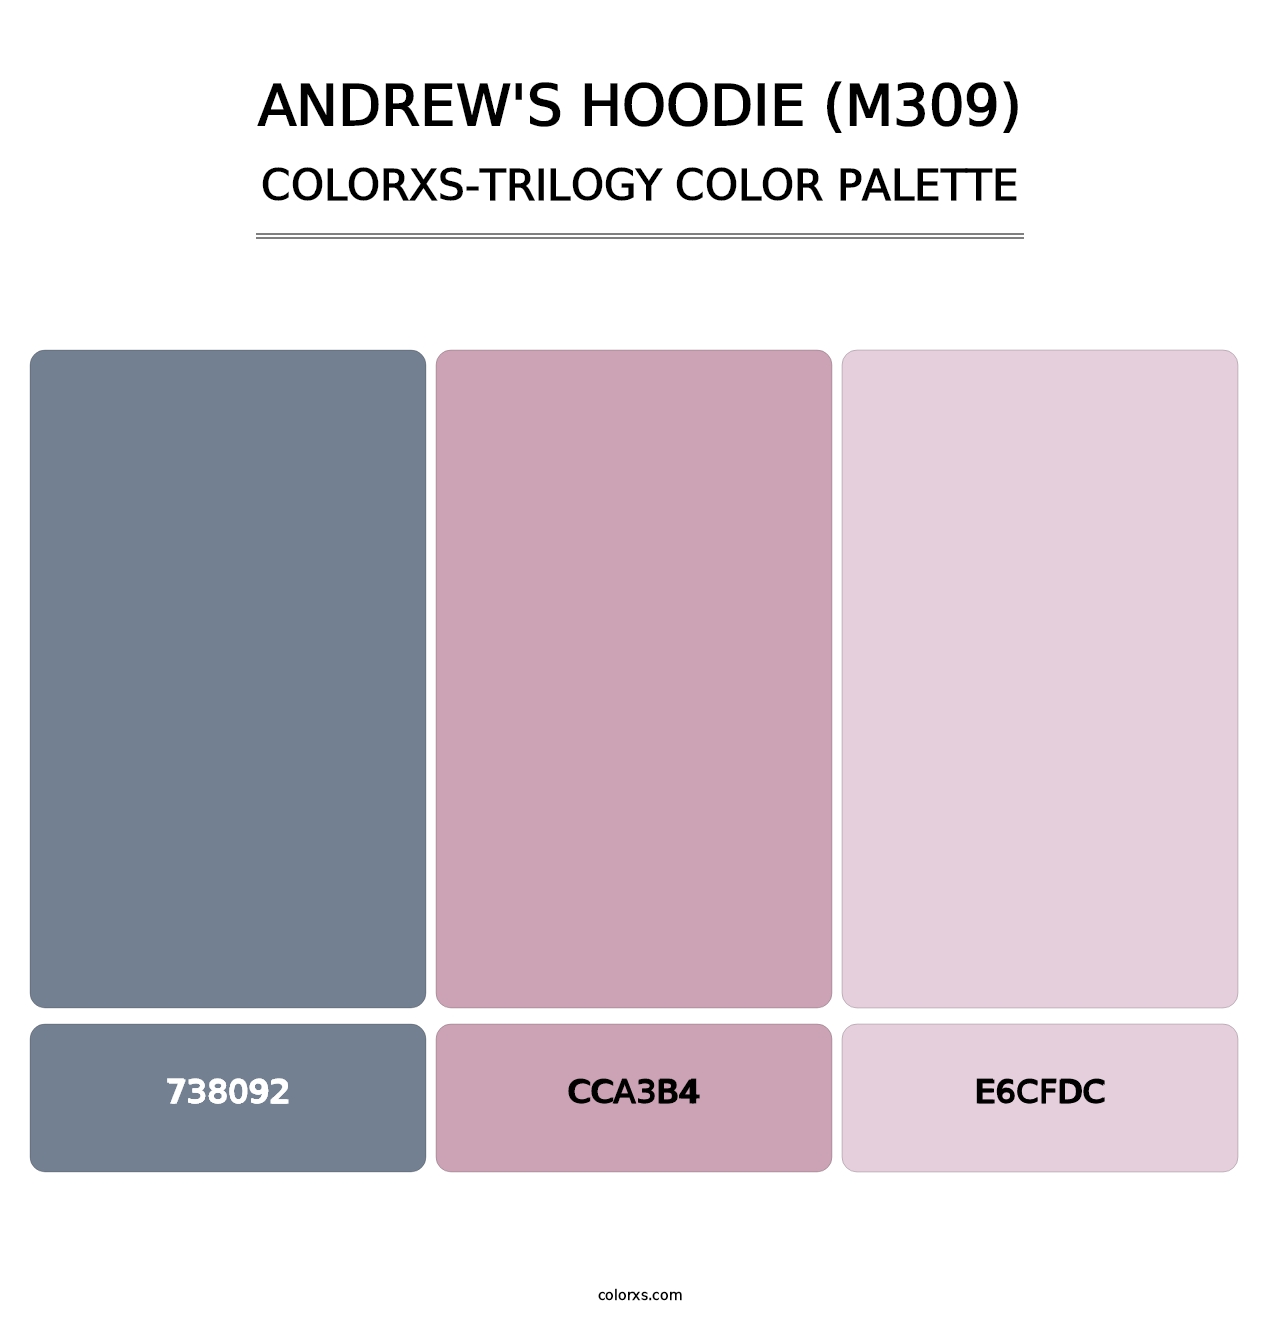 Andrew's Hoodie (M309) - Colorxs Trilogy Palette